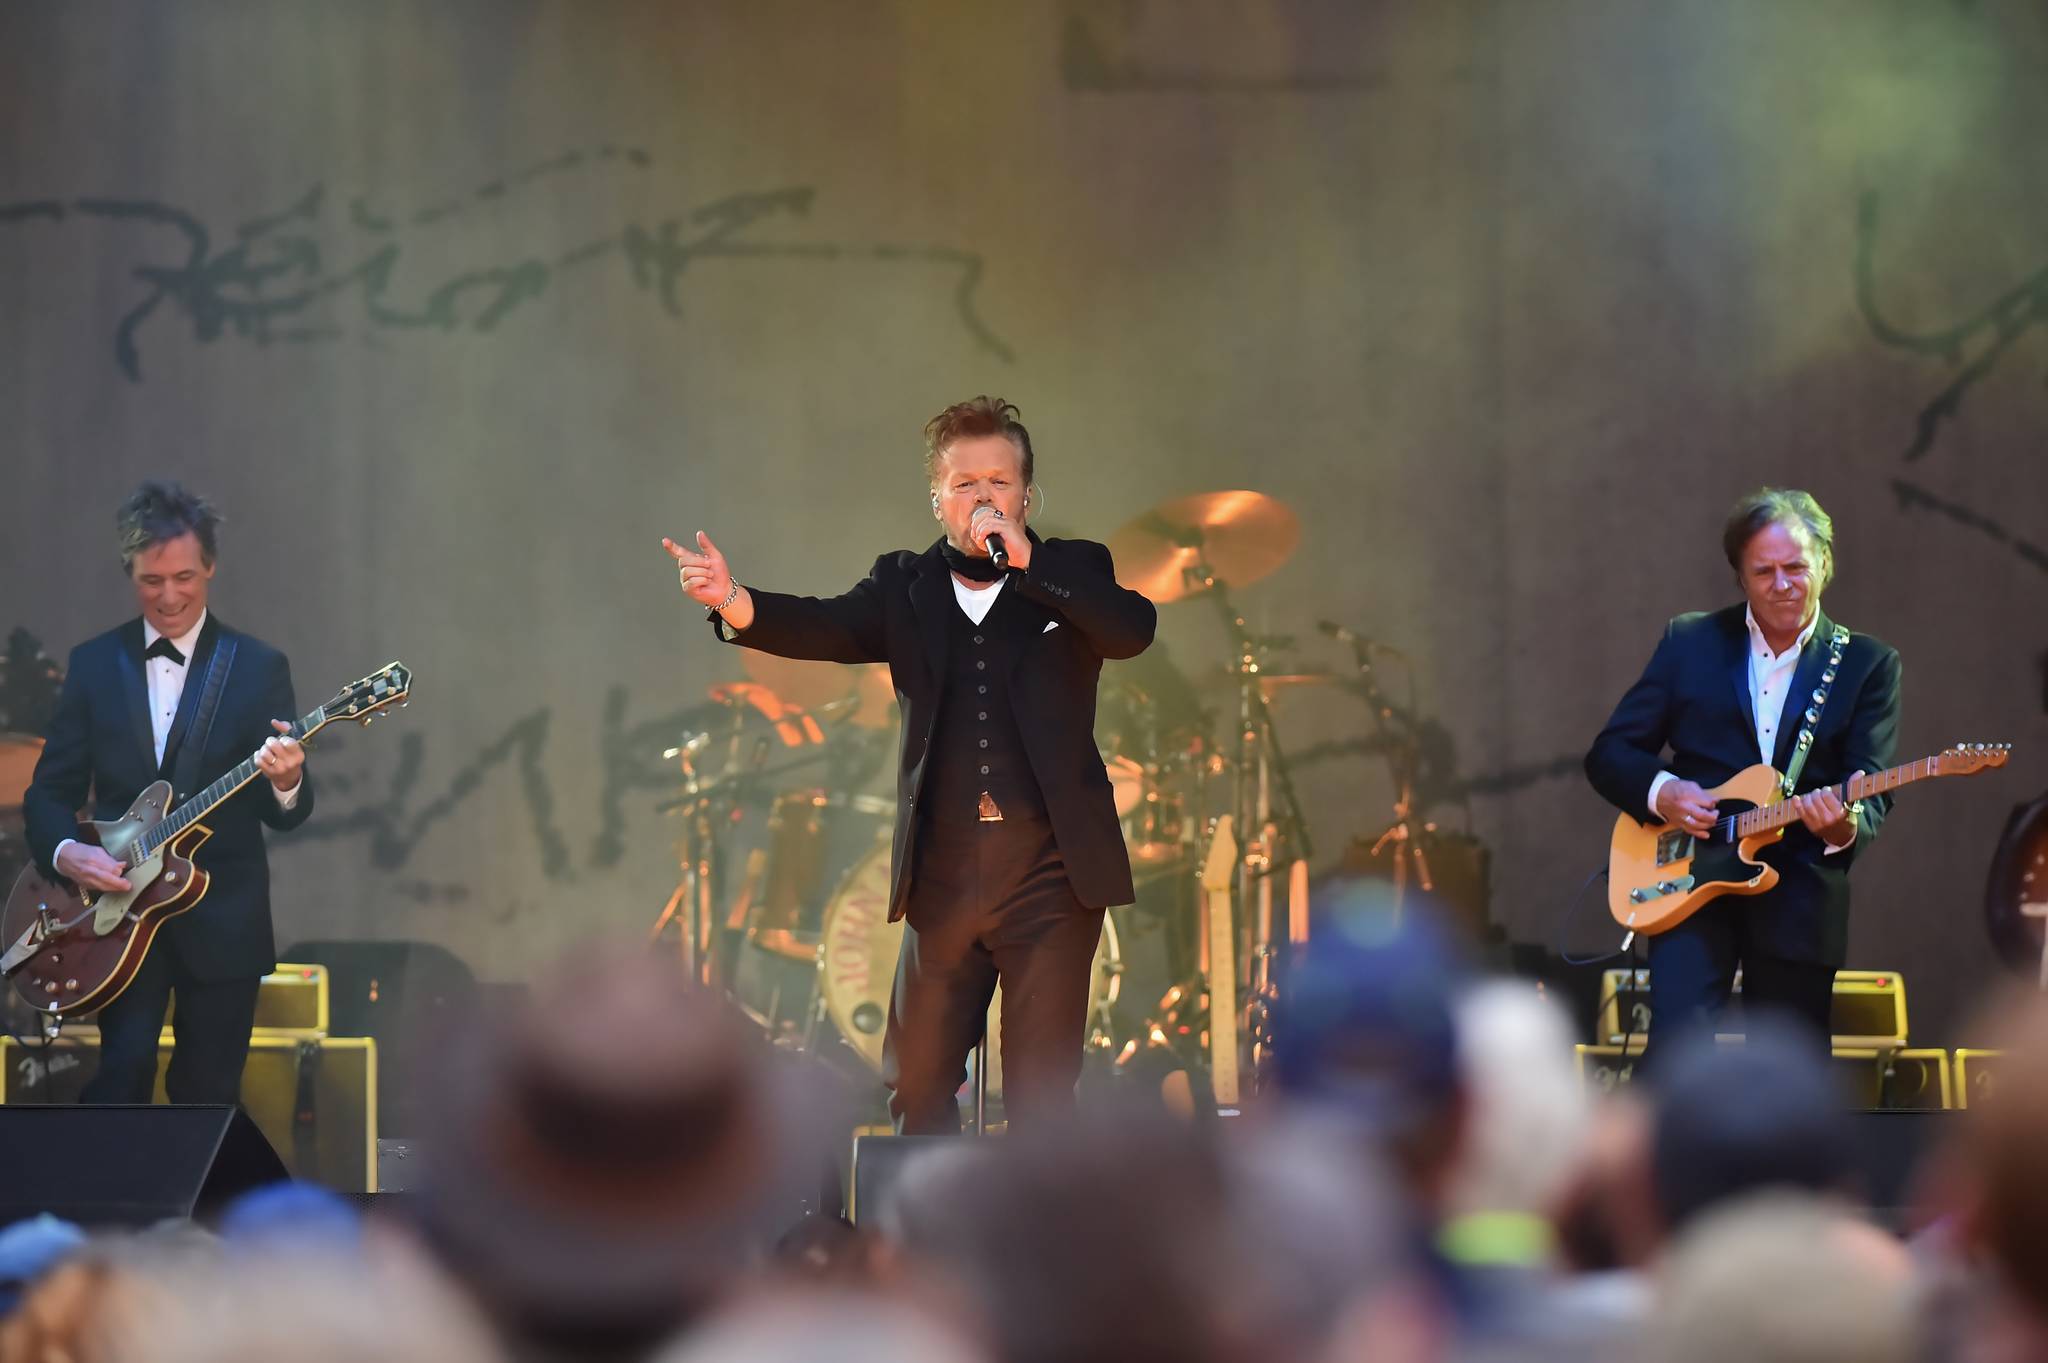 With Mellencamp leading the way, Redmond becomes small-town USA for one evening | Review